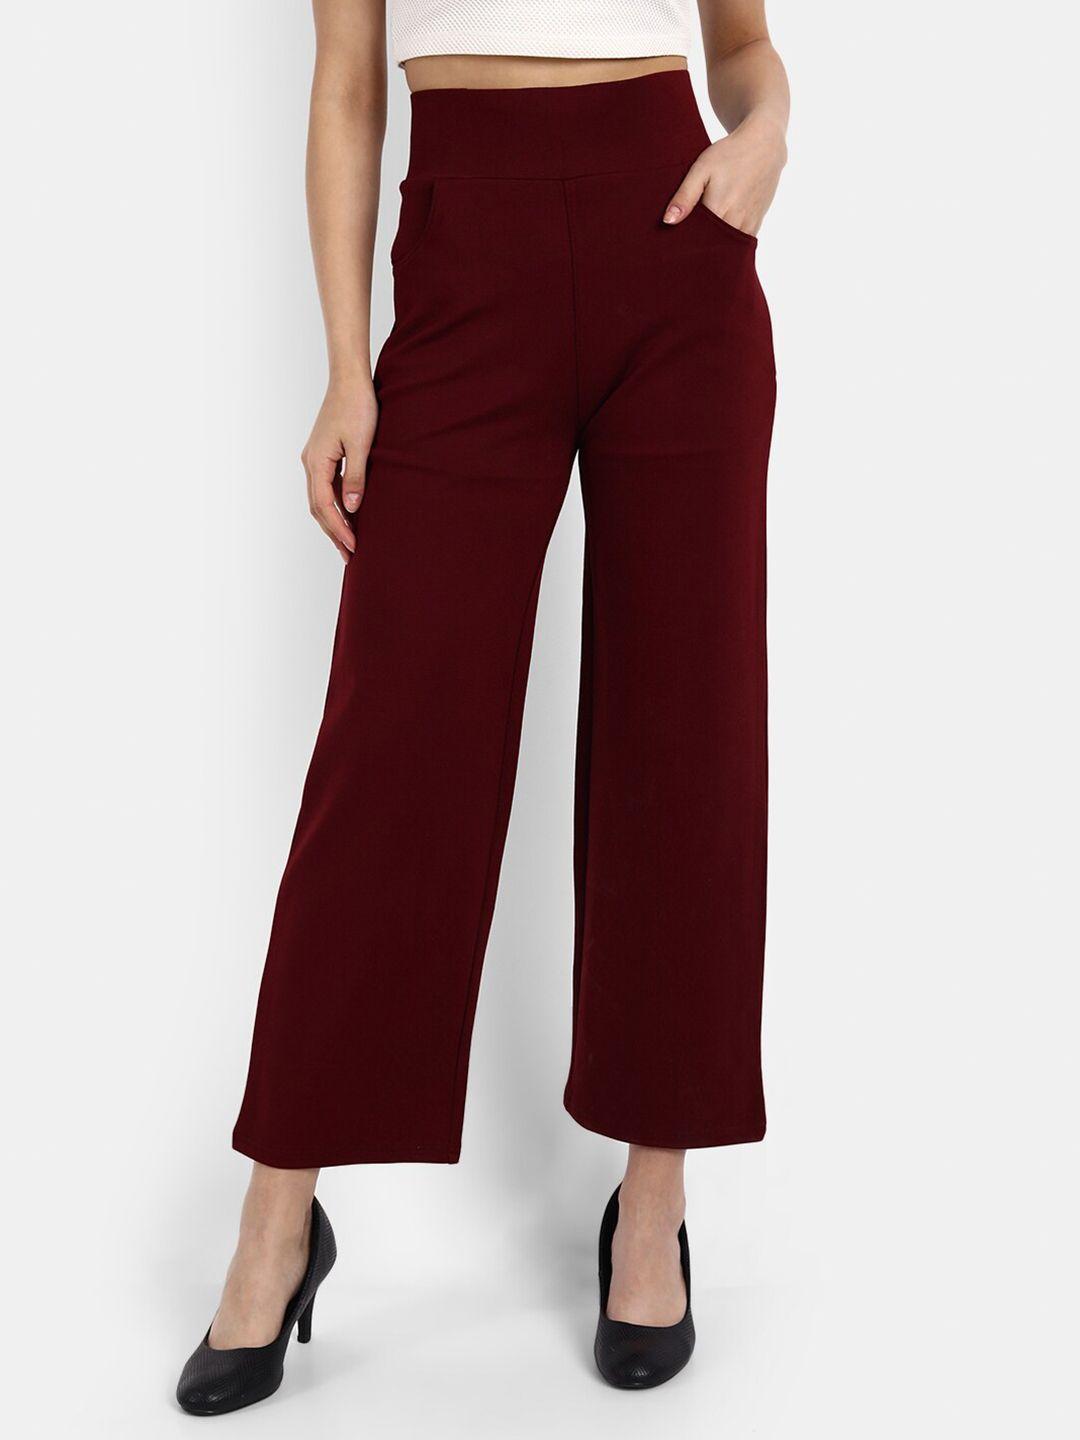 next-one-women-maroon-solid-straight-fit-jeggings